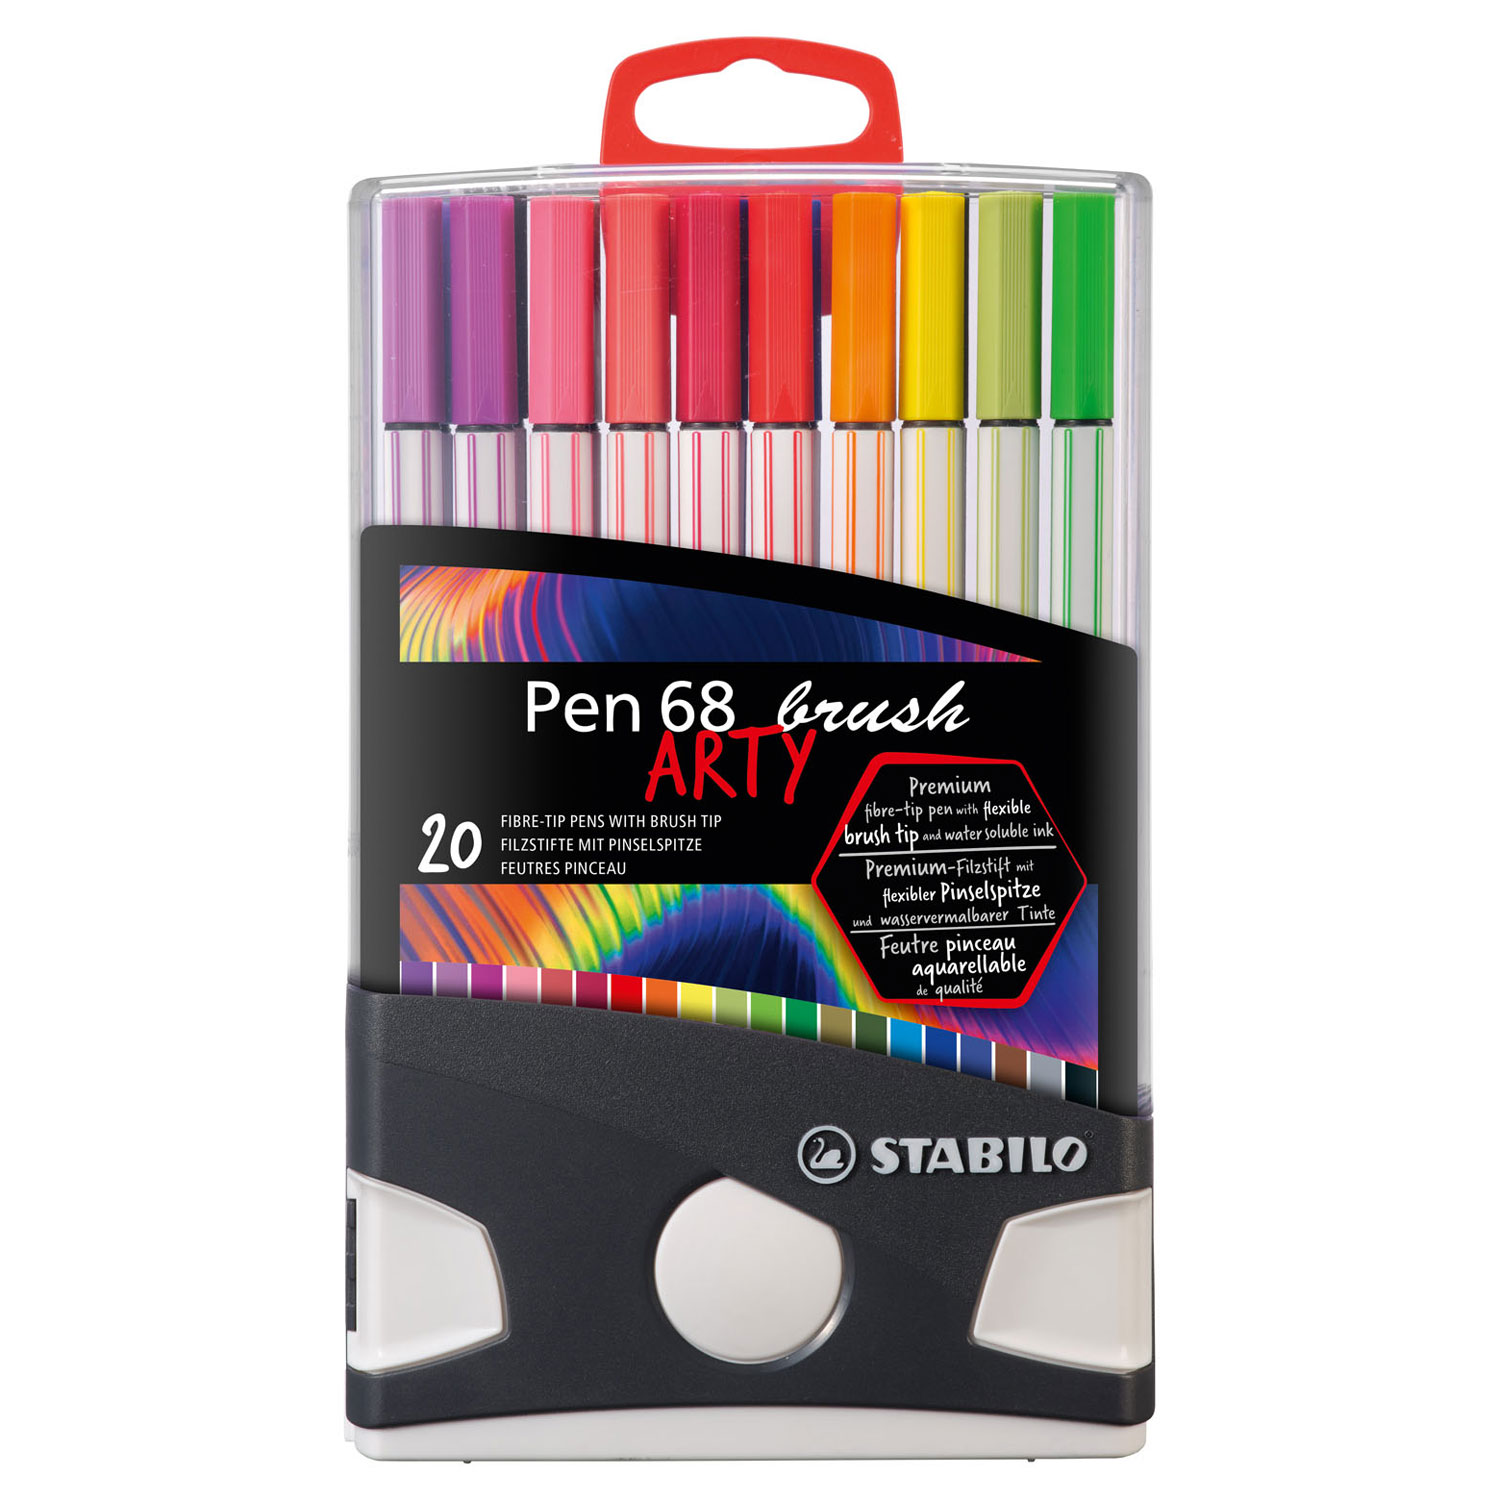 toon Hoelahoep oosten STABILO Pen 68 Brush ARTY ColorParade, 20st. | Thimble Toys